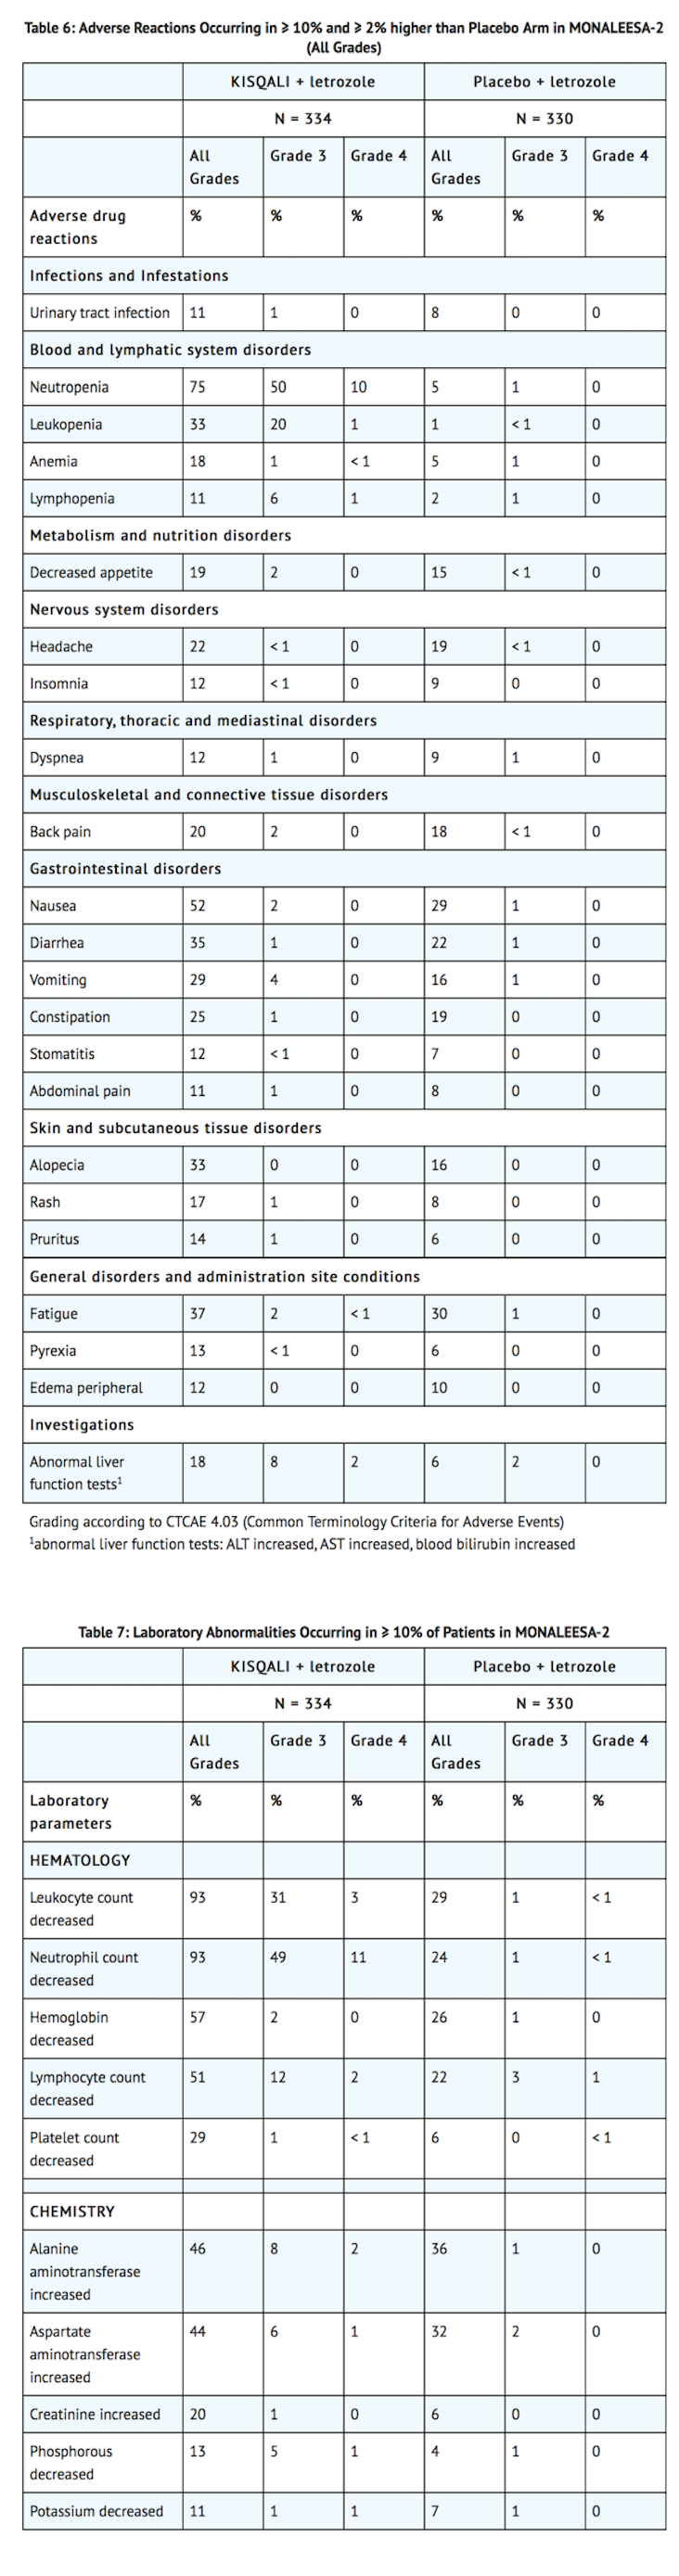 File:Ribociclib Adverse Reactions Tables 1 and 2.png